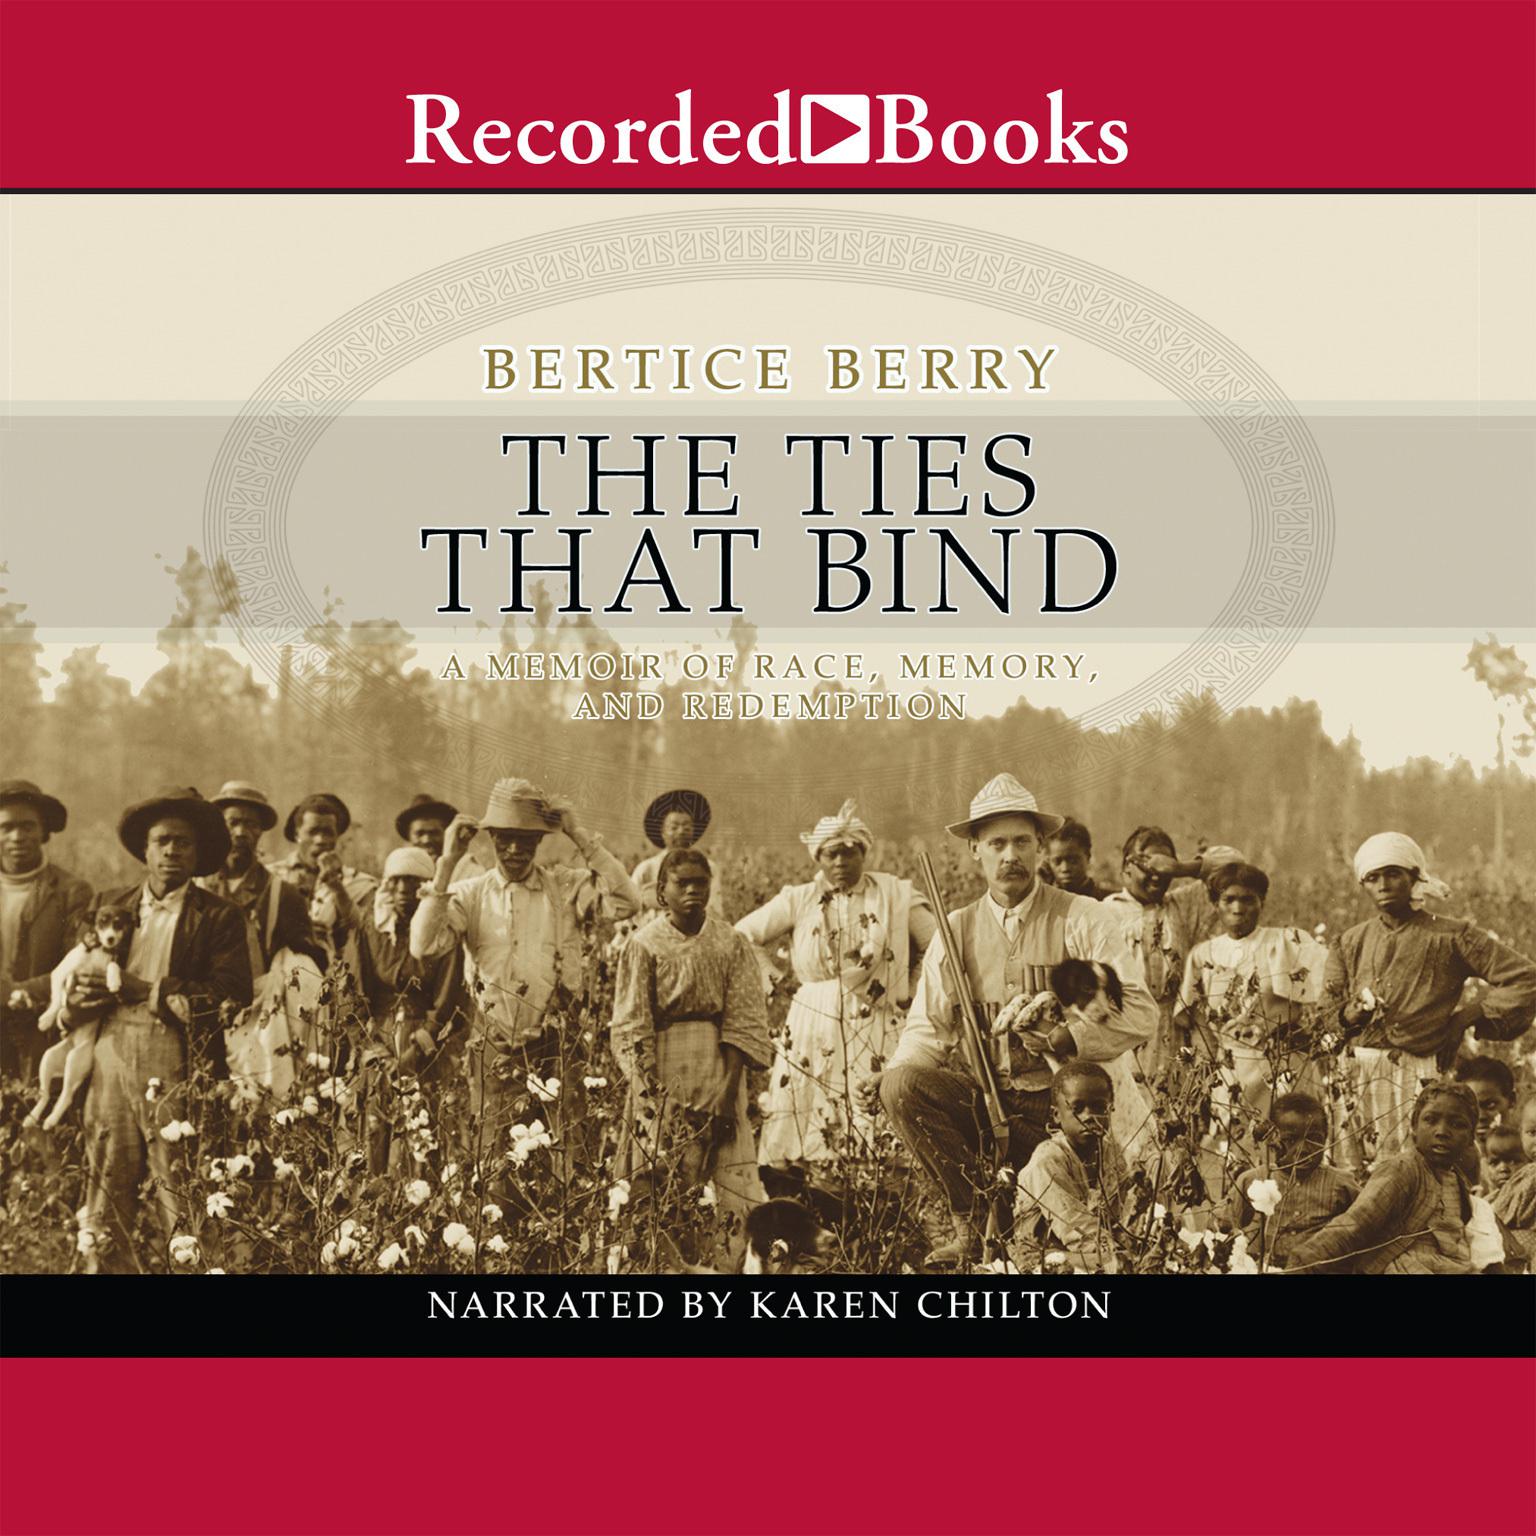 The Ties That Bind: A Memoir of Race, Memory, and Redemption Audiobook, by Bertice Berry